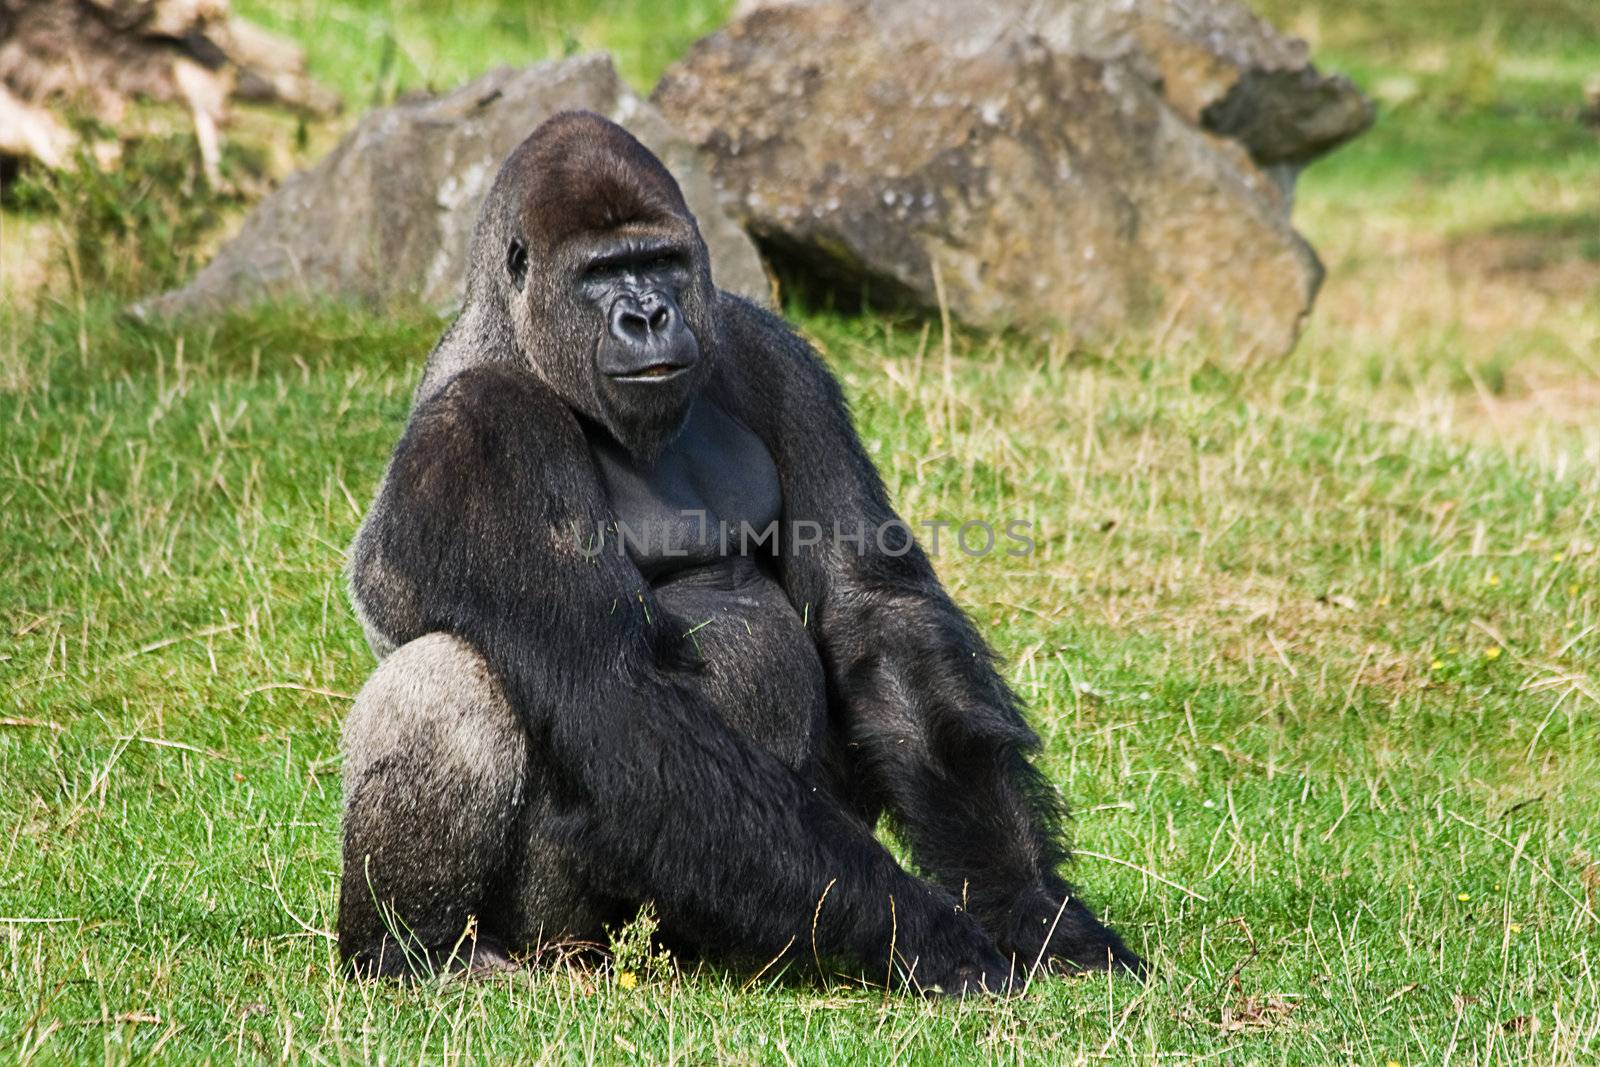 Gorilla silverback relaxing by Colette